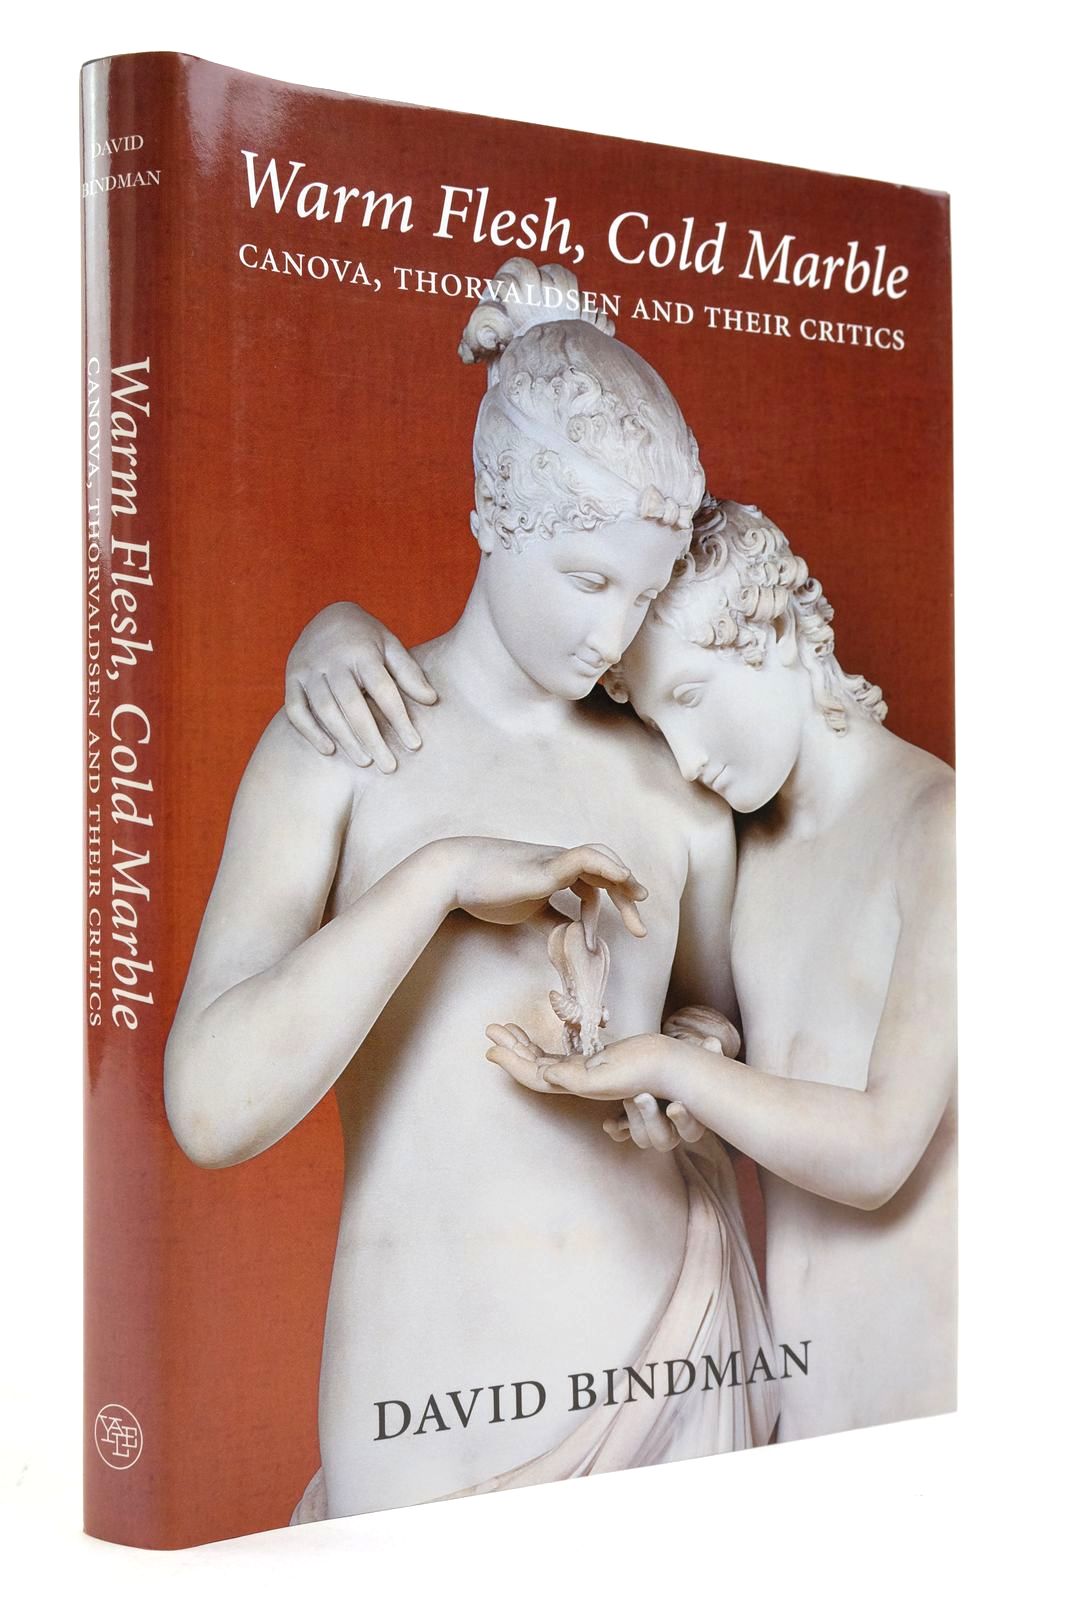 Photo of WARM FLESH, COLD MARBLE: CANOVA, THORVALDSEN AND THEIR CRITICS written by Bindman, David published by Yale University Press (STOCK CODE: 2138951)  for sale by Stella & Rose's Books